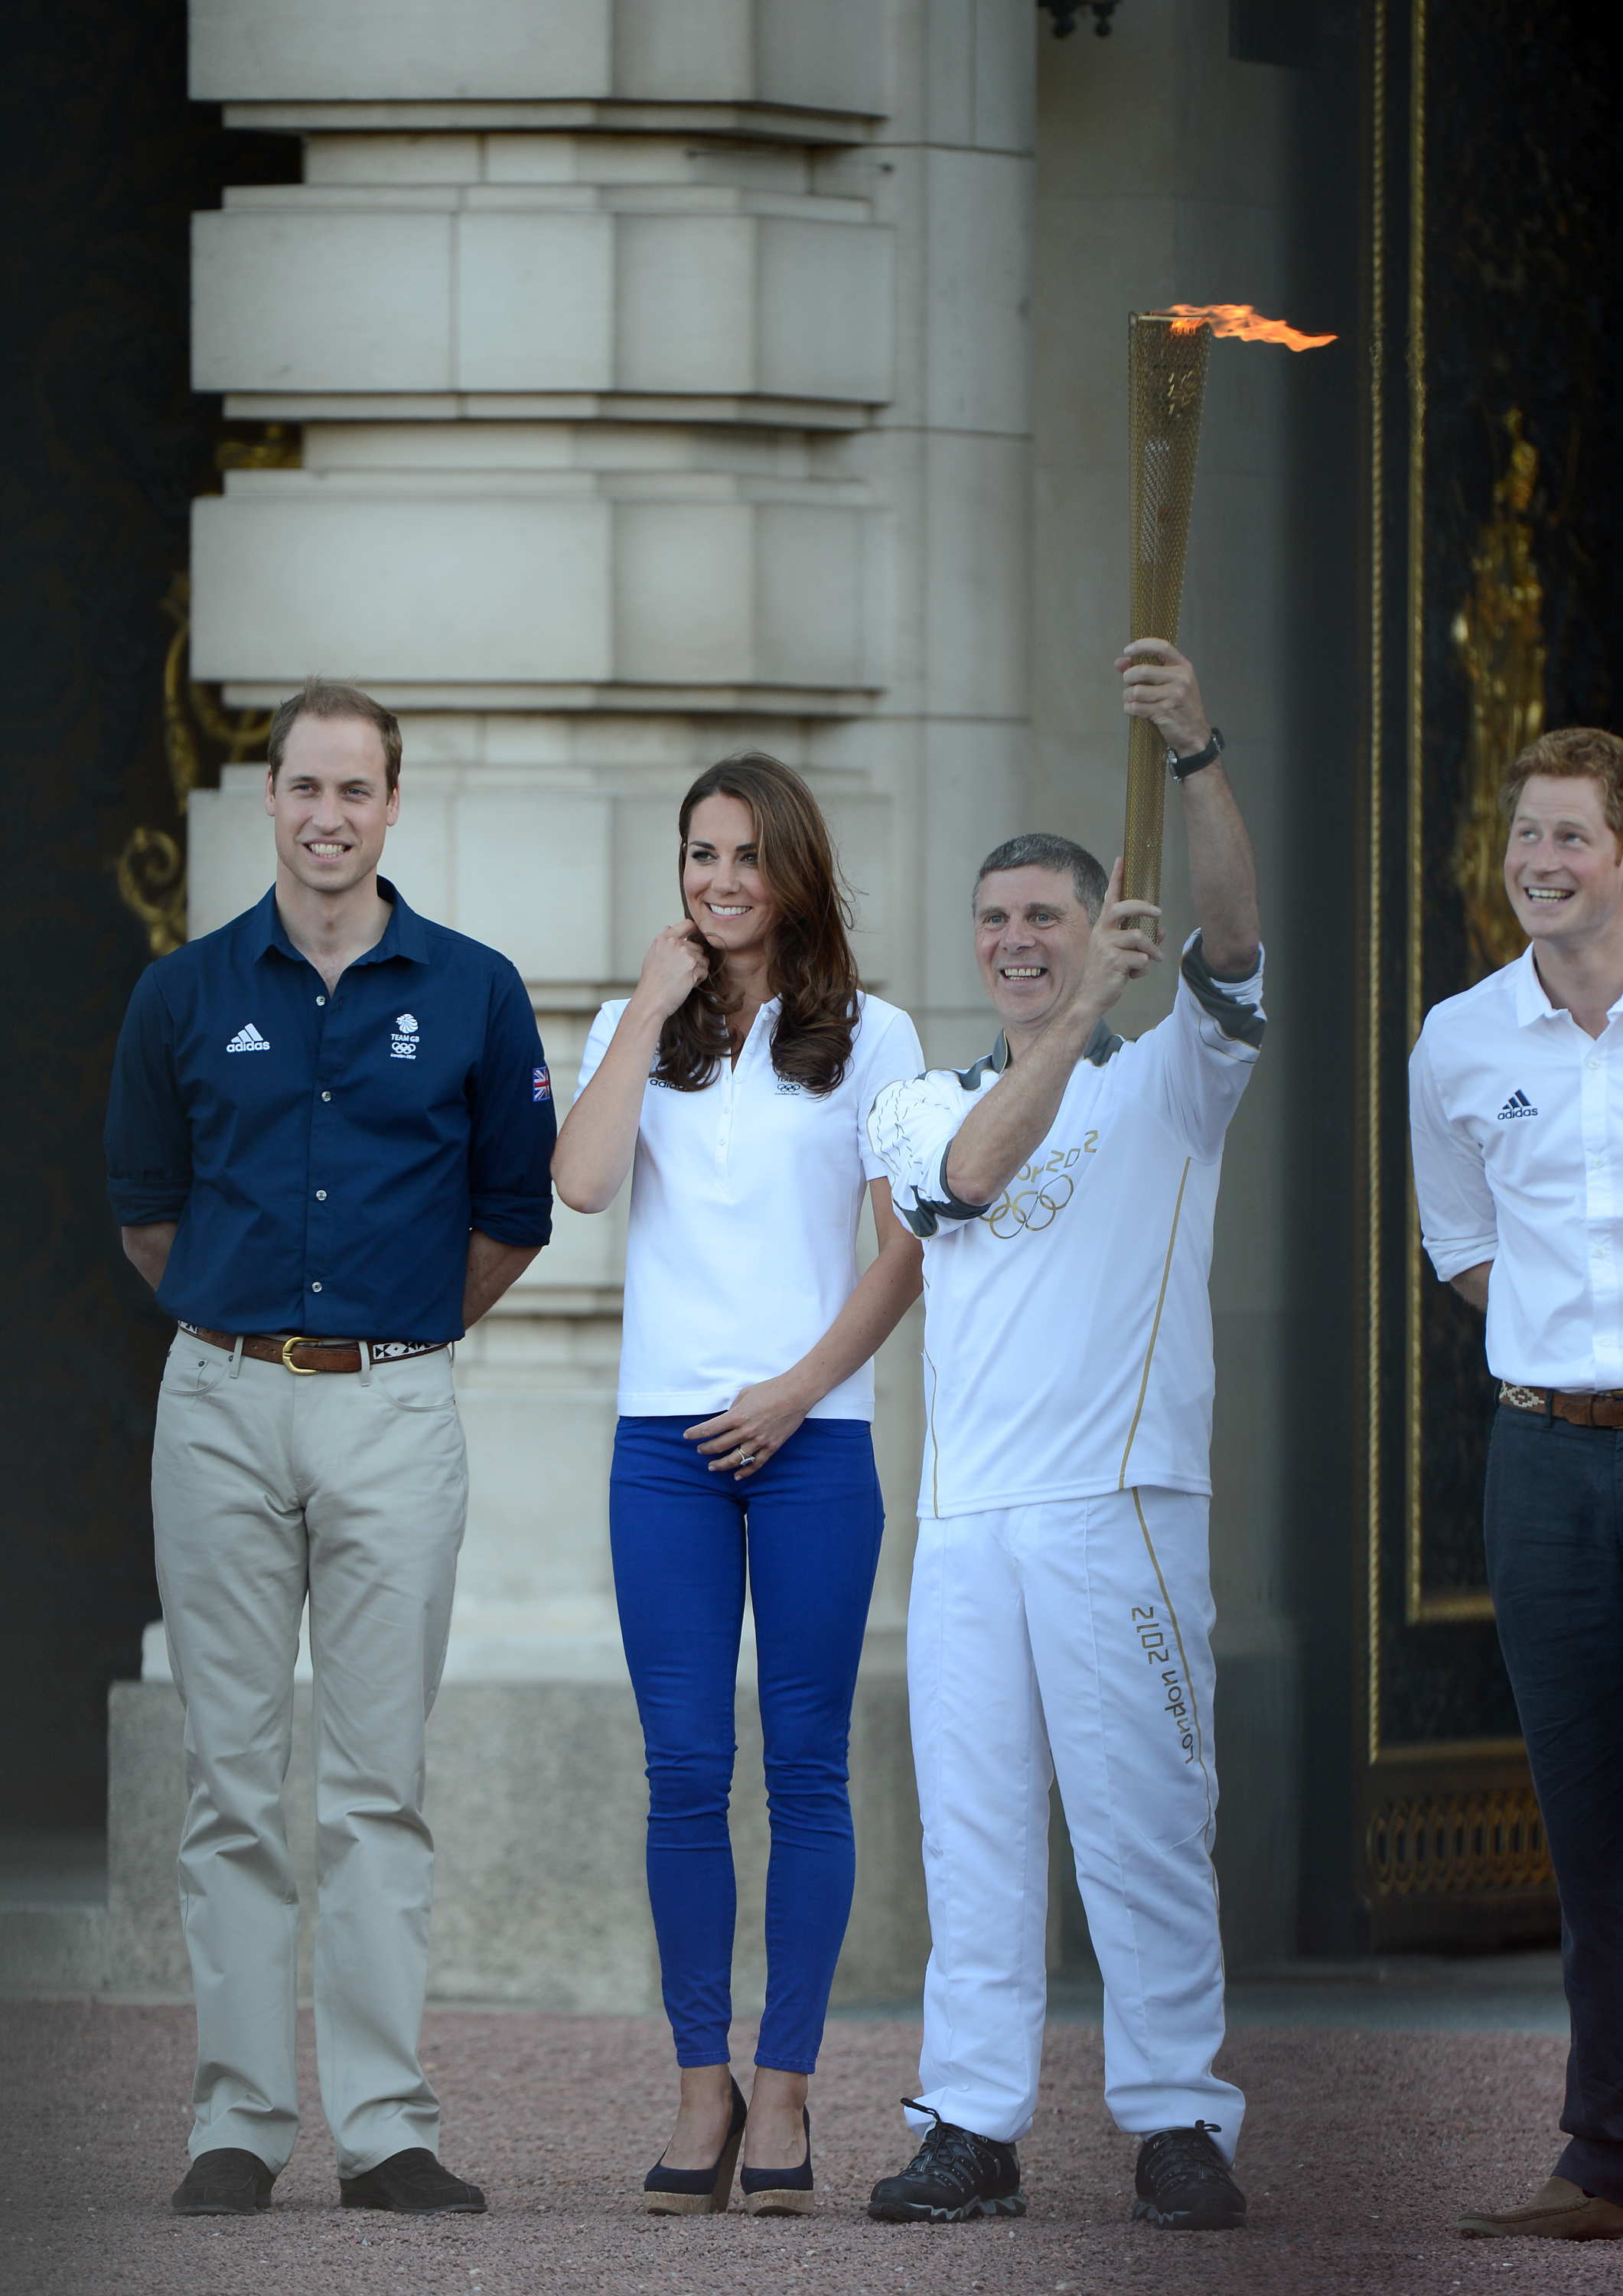 Olympically Played, Wills, Harry, and Kate